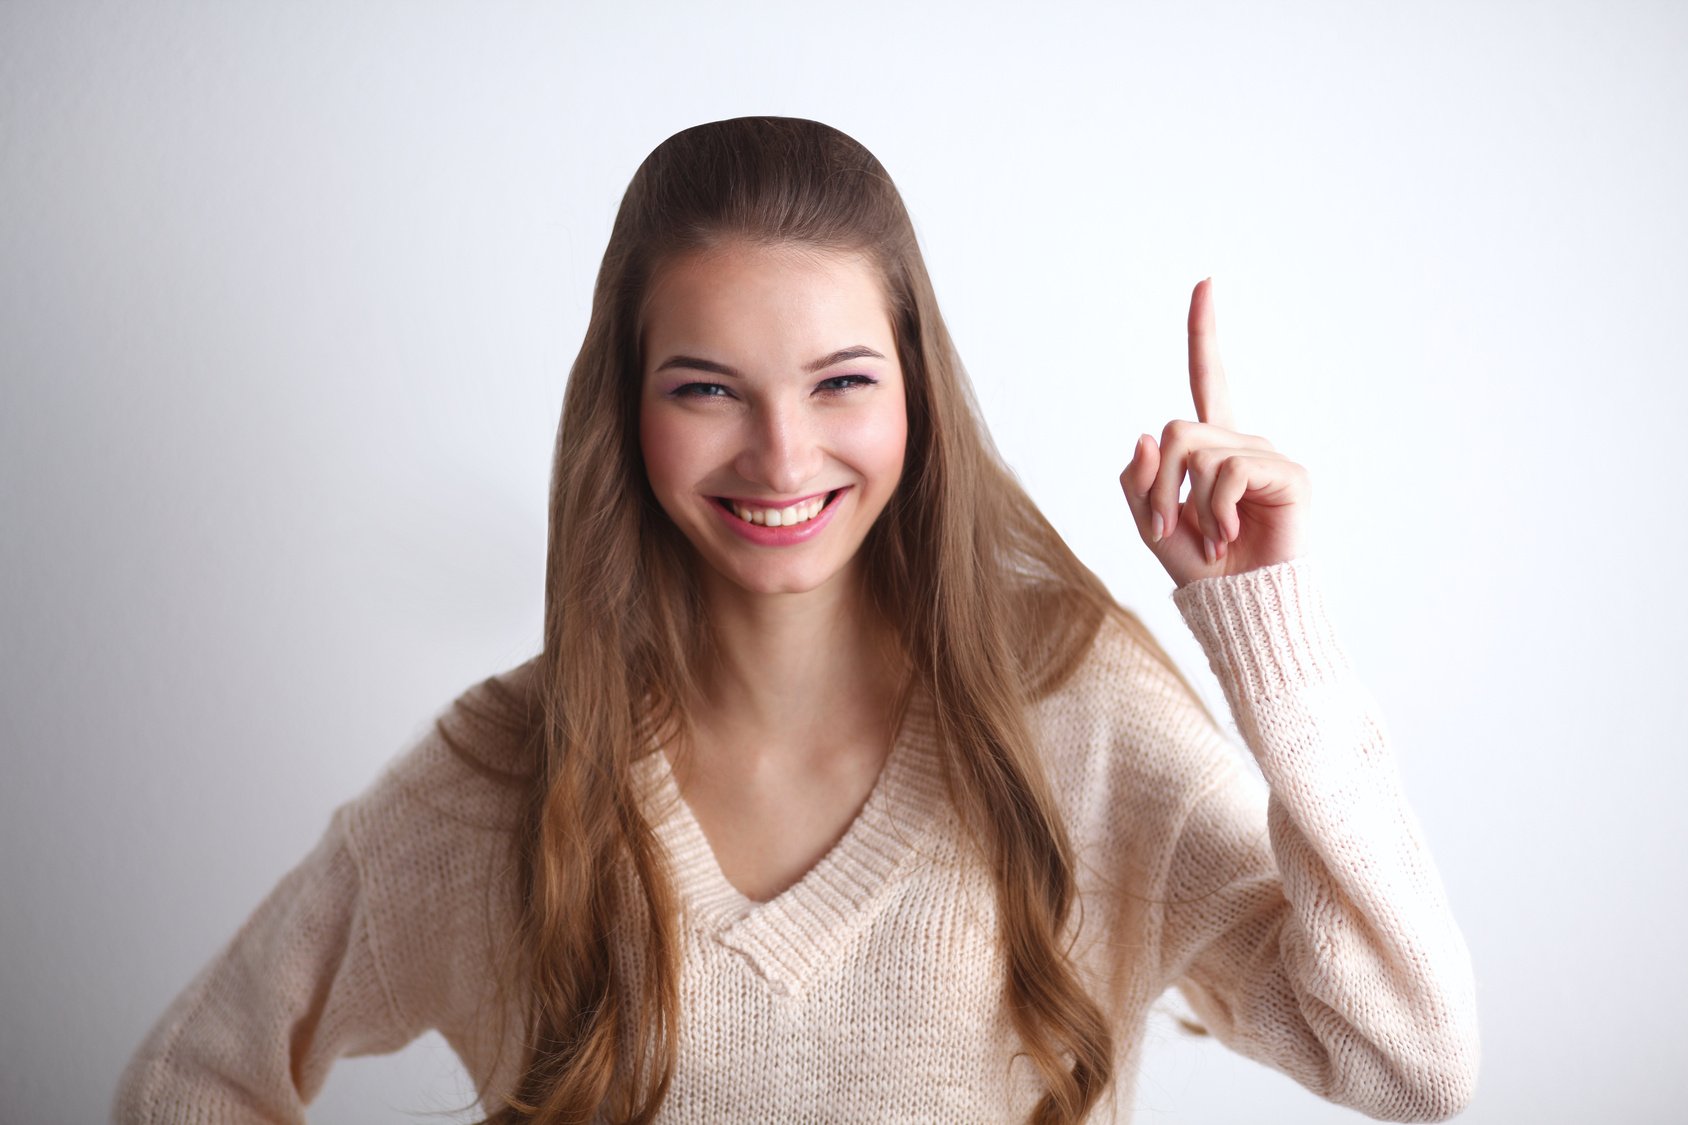 Portrait of a smiling young woman pointing up